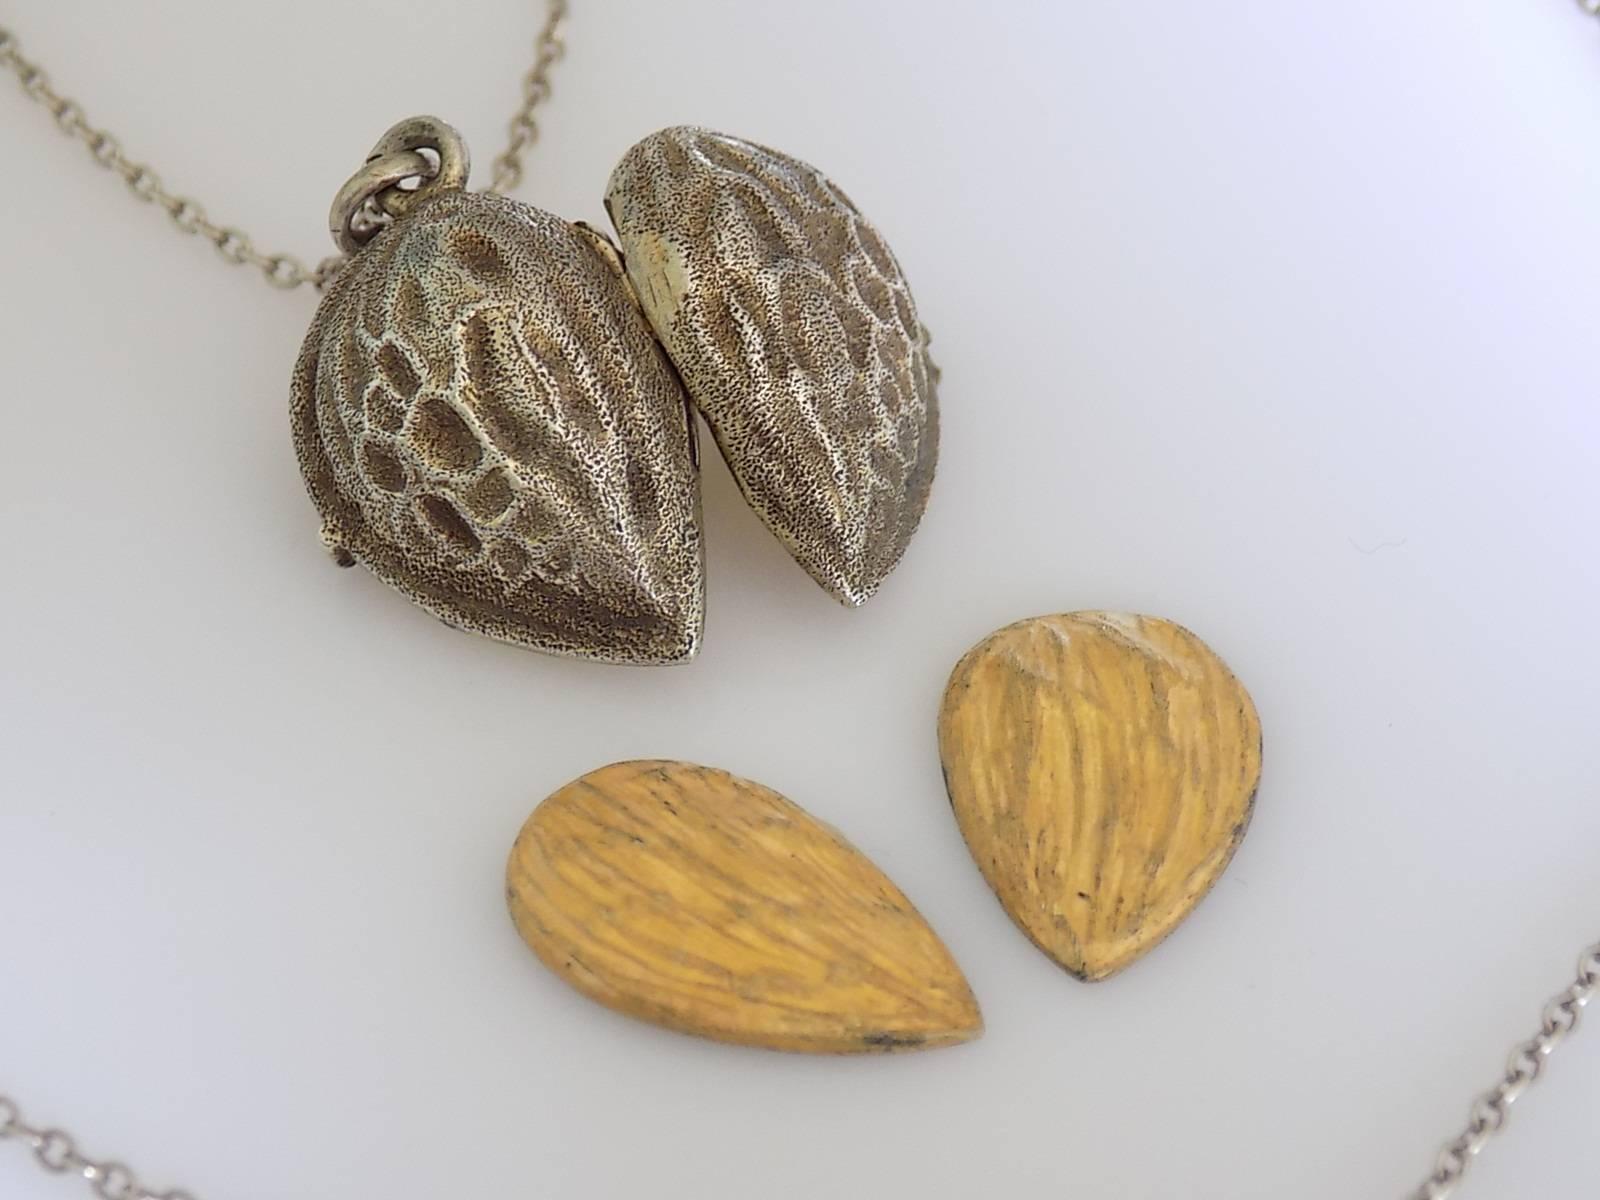 A Lovely late Victorian solid Silver and Gilt Almond locket. The locket complete with a realistic painted nut inside and Silver chain (tested). Beautiful details all the way around. Possibly French origin.
Total drop including top ring 26mm, width